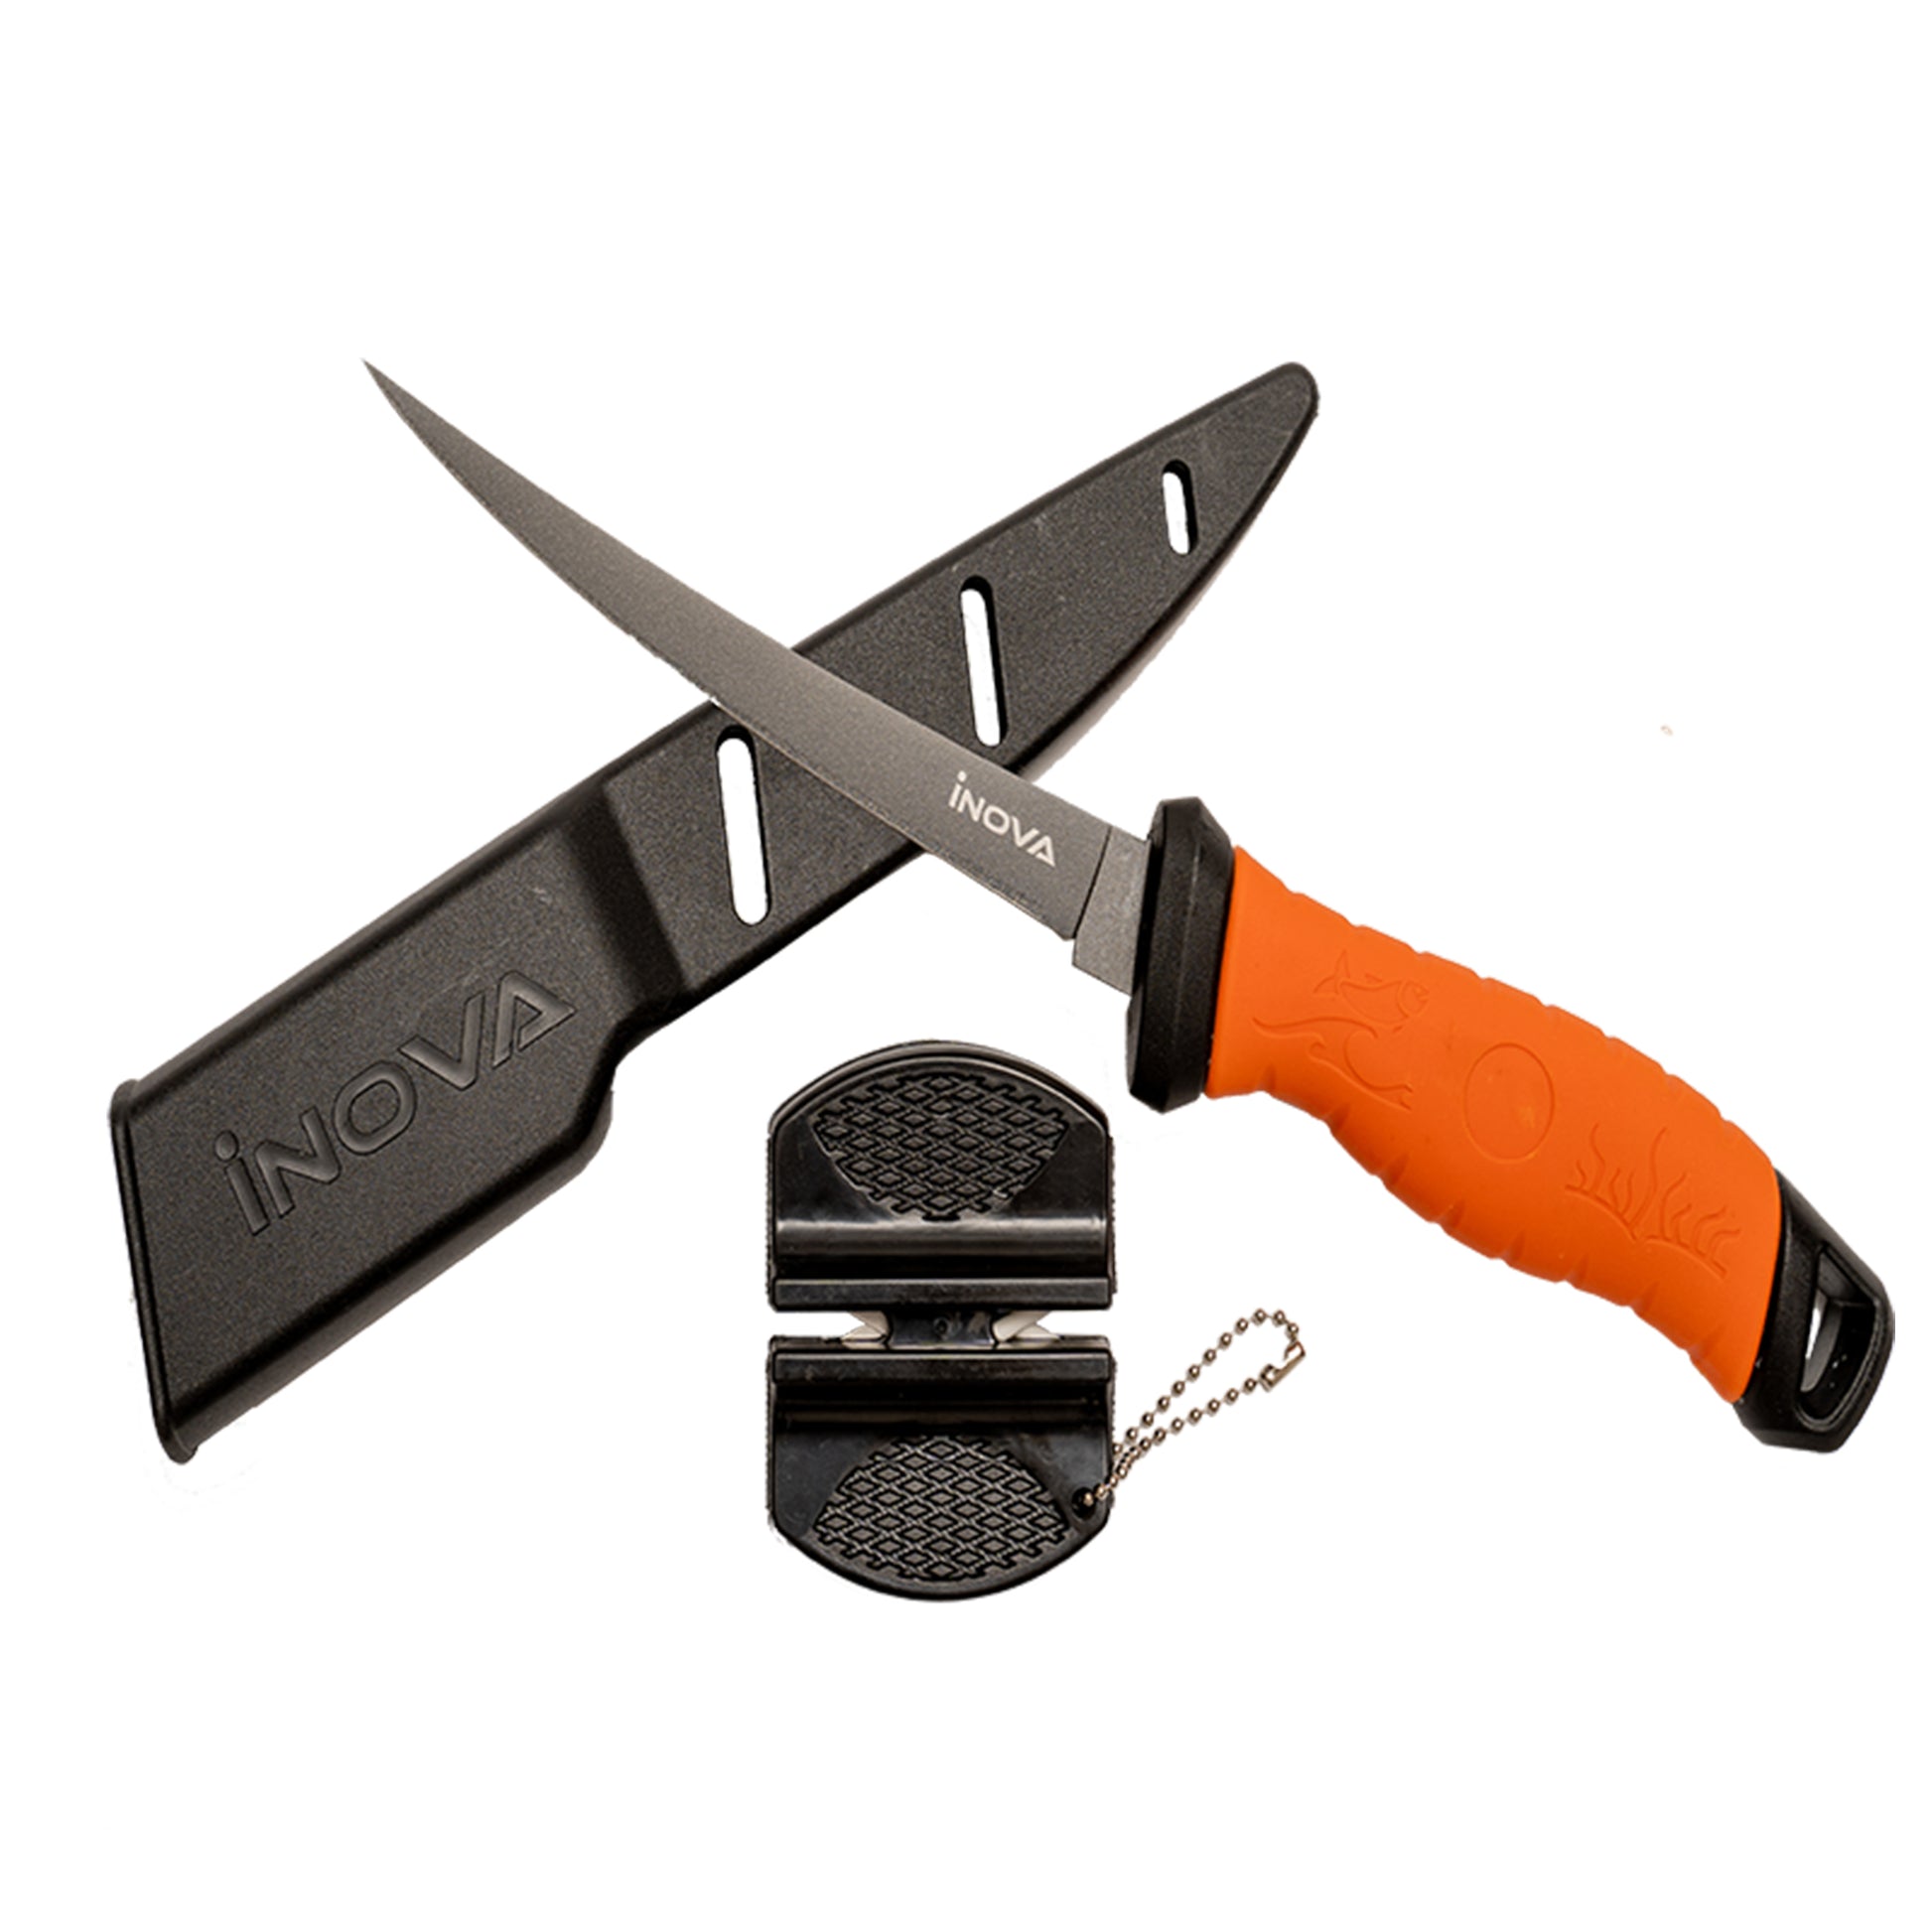 Inova Bait Fillet Knife and Sheath with 6 inch or 150mm Blade